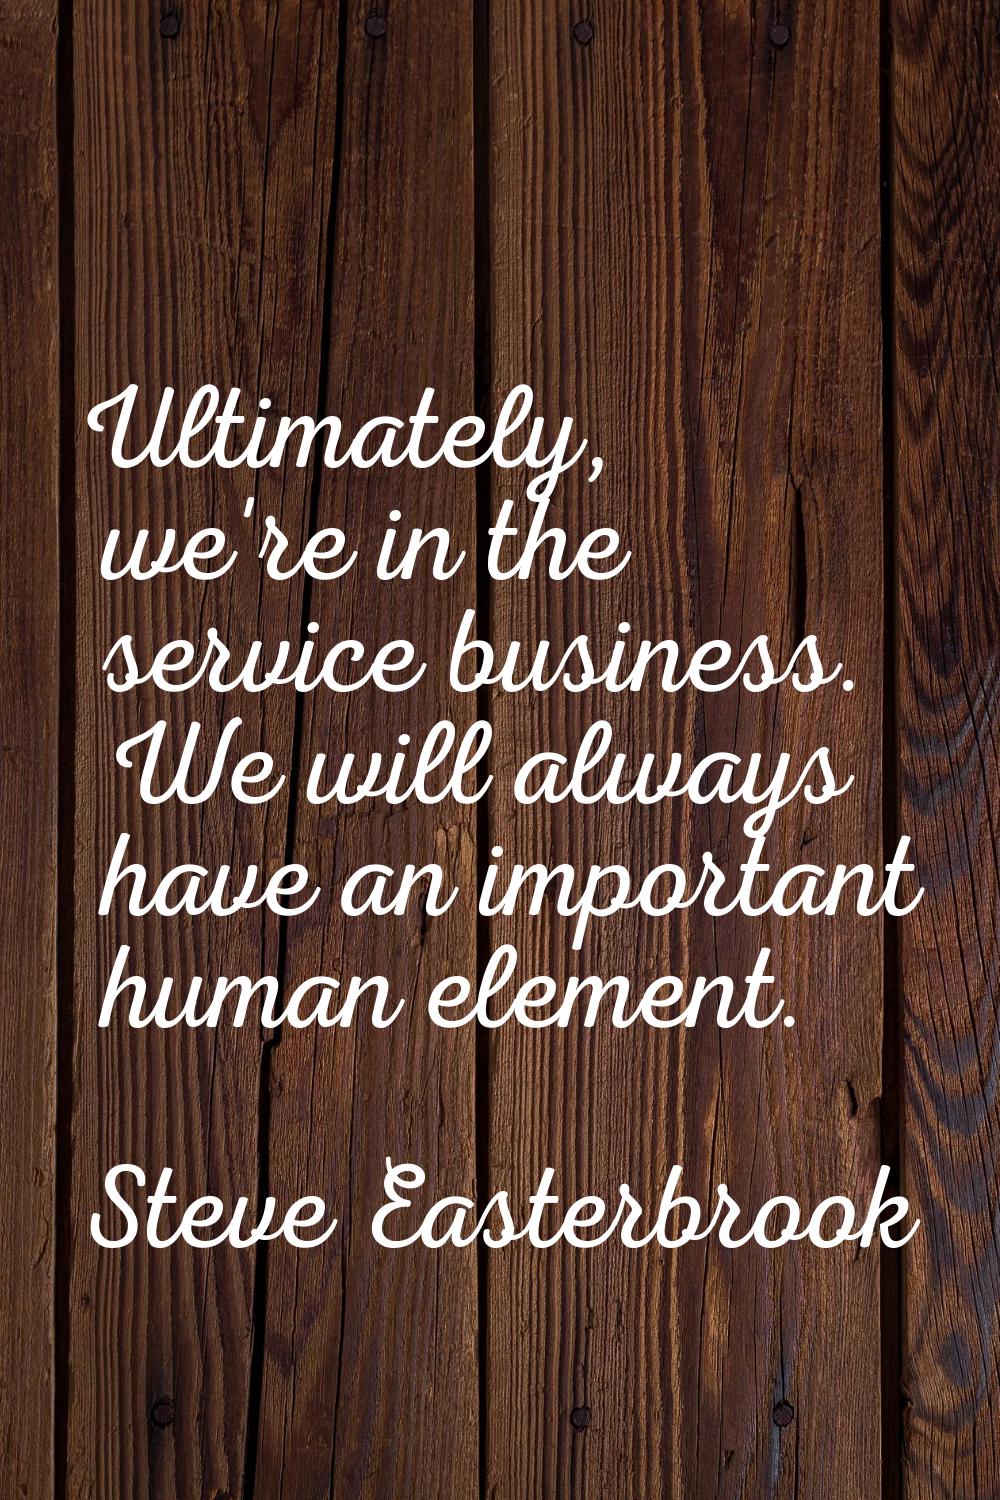 Ultimately, we're in the service business. We will always have an important human element.